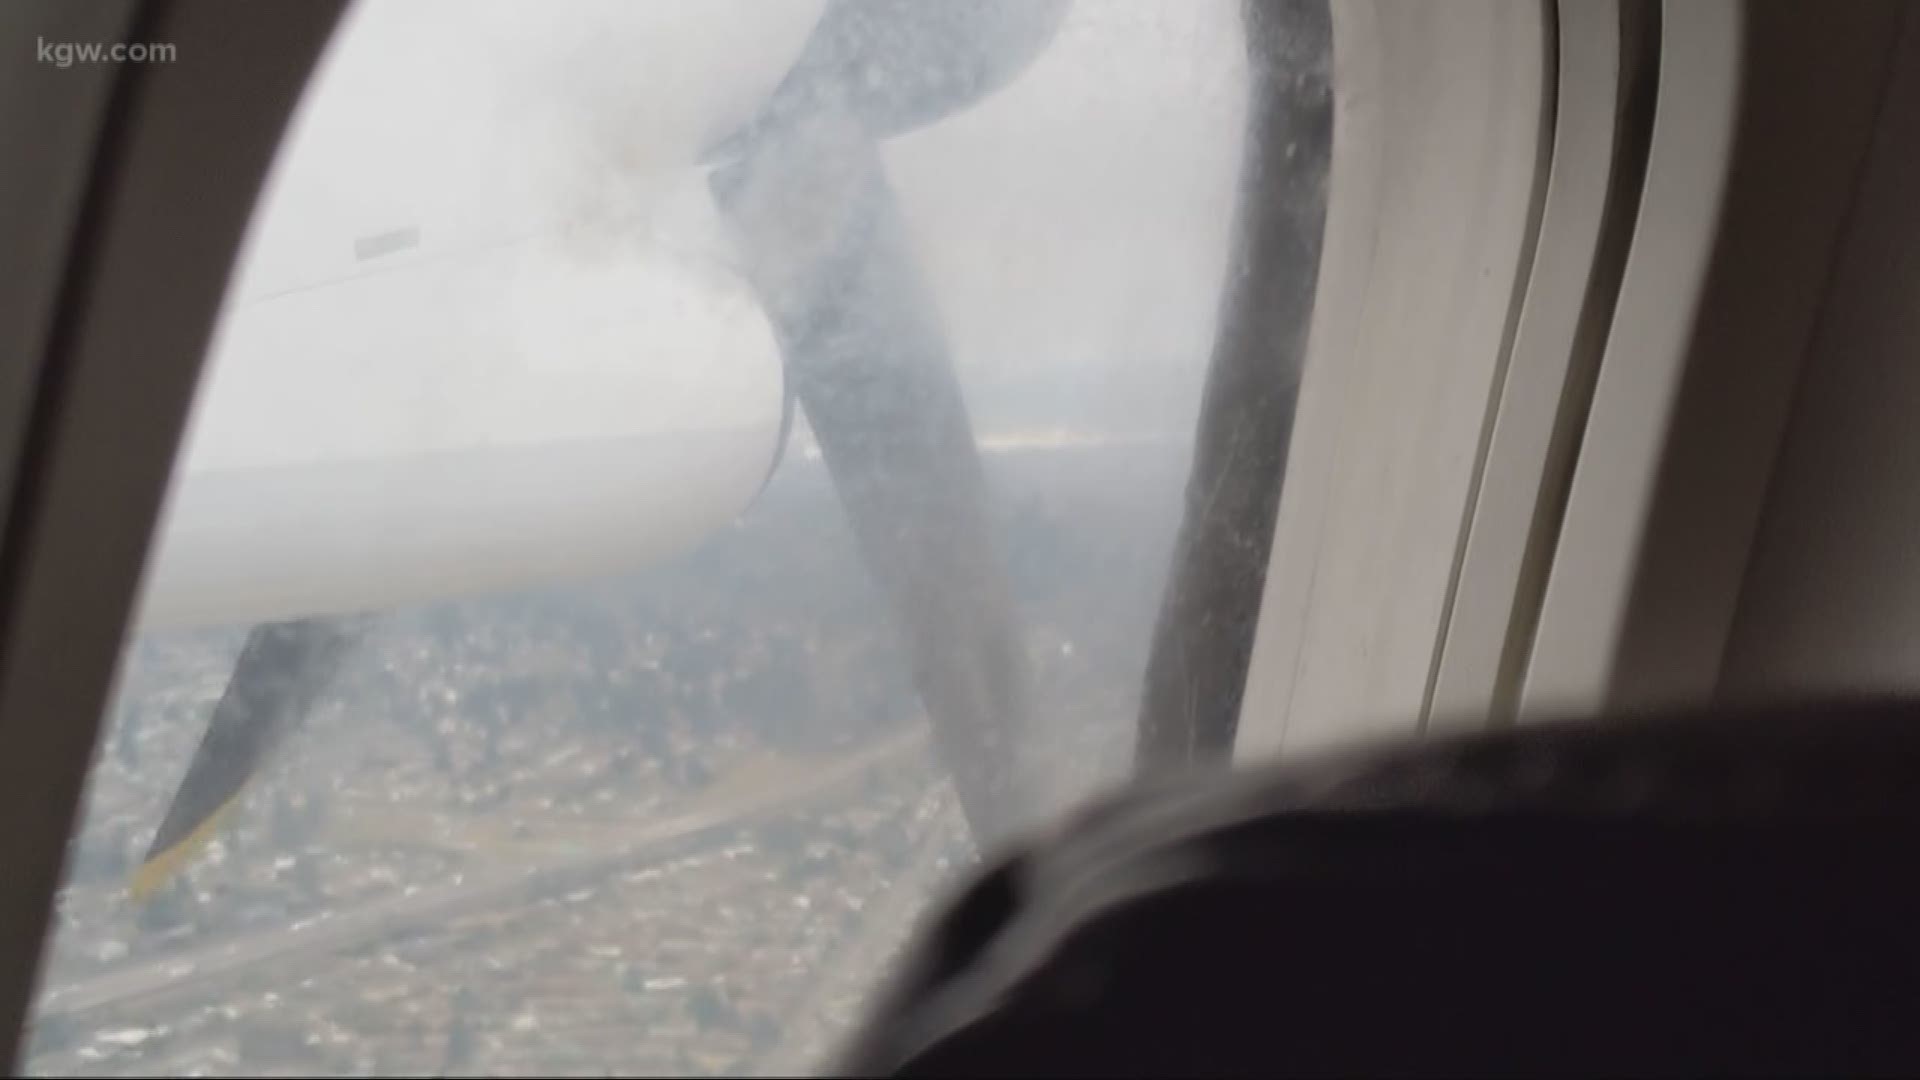 Passengers remained calm as they watched a propeller on a Horizon flight slow to a stop. The episode was caught on cam. KGW chatted with the passenger who took on-board video of the prop and passengers.